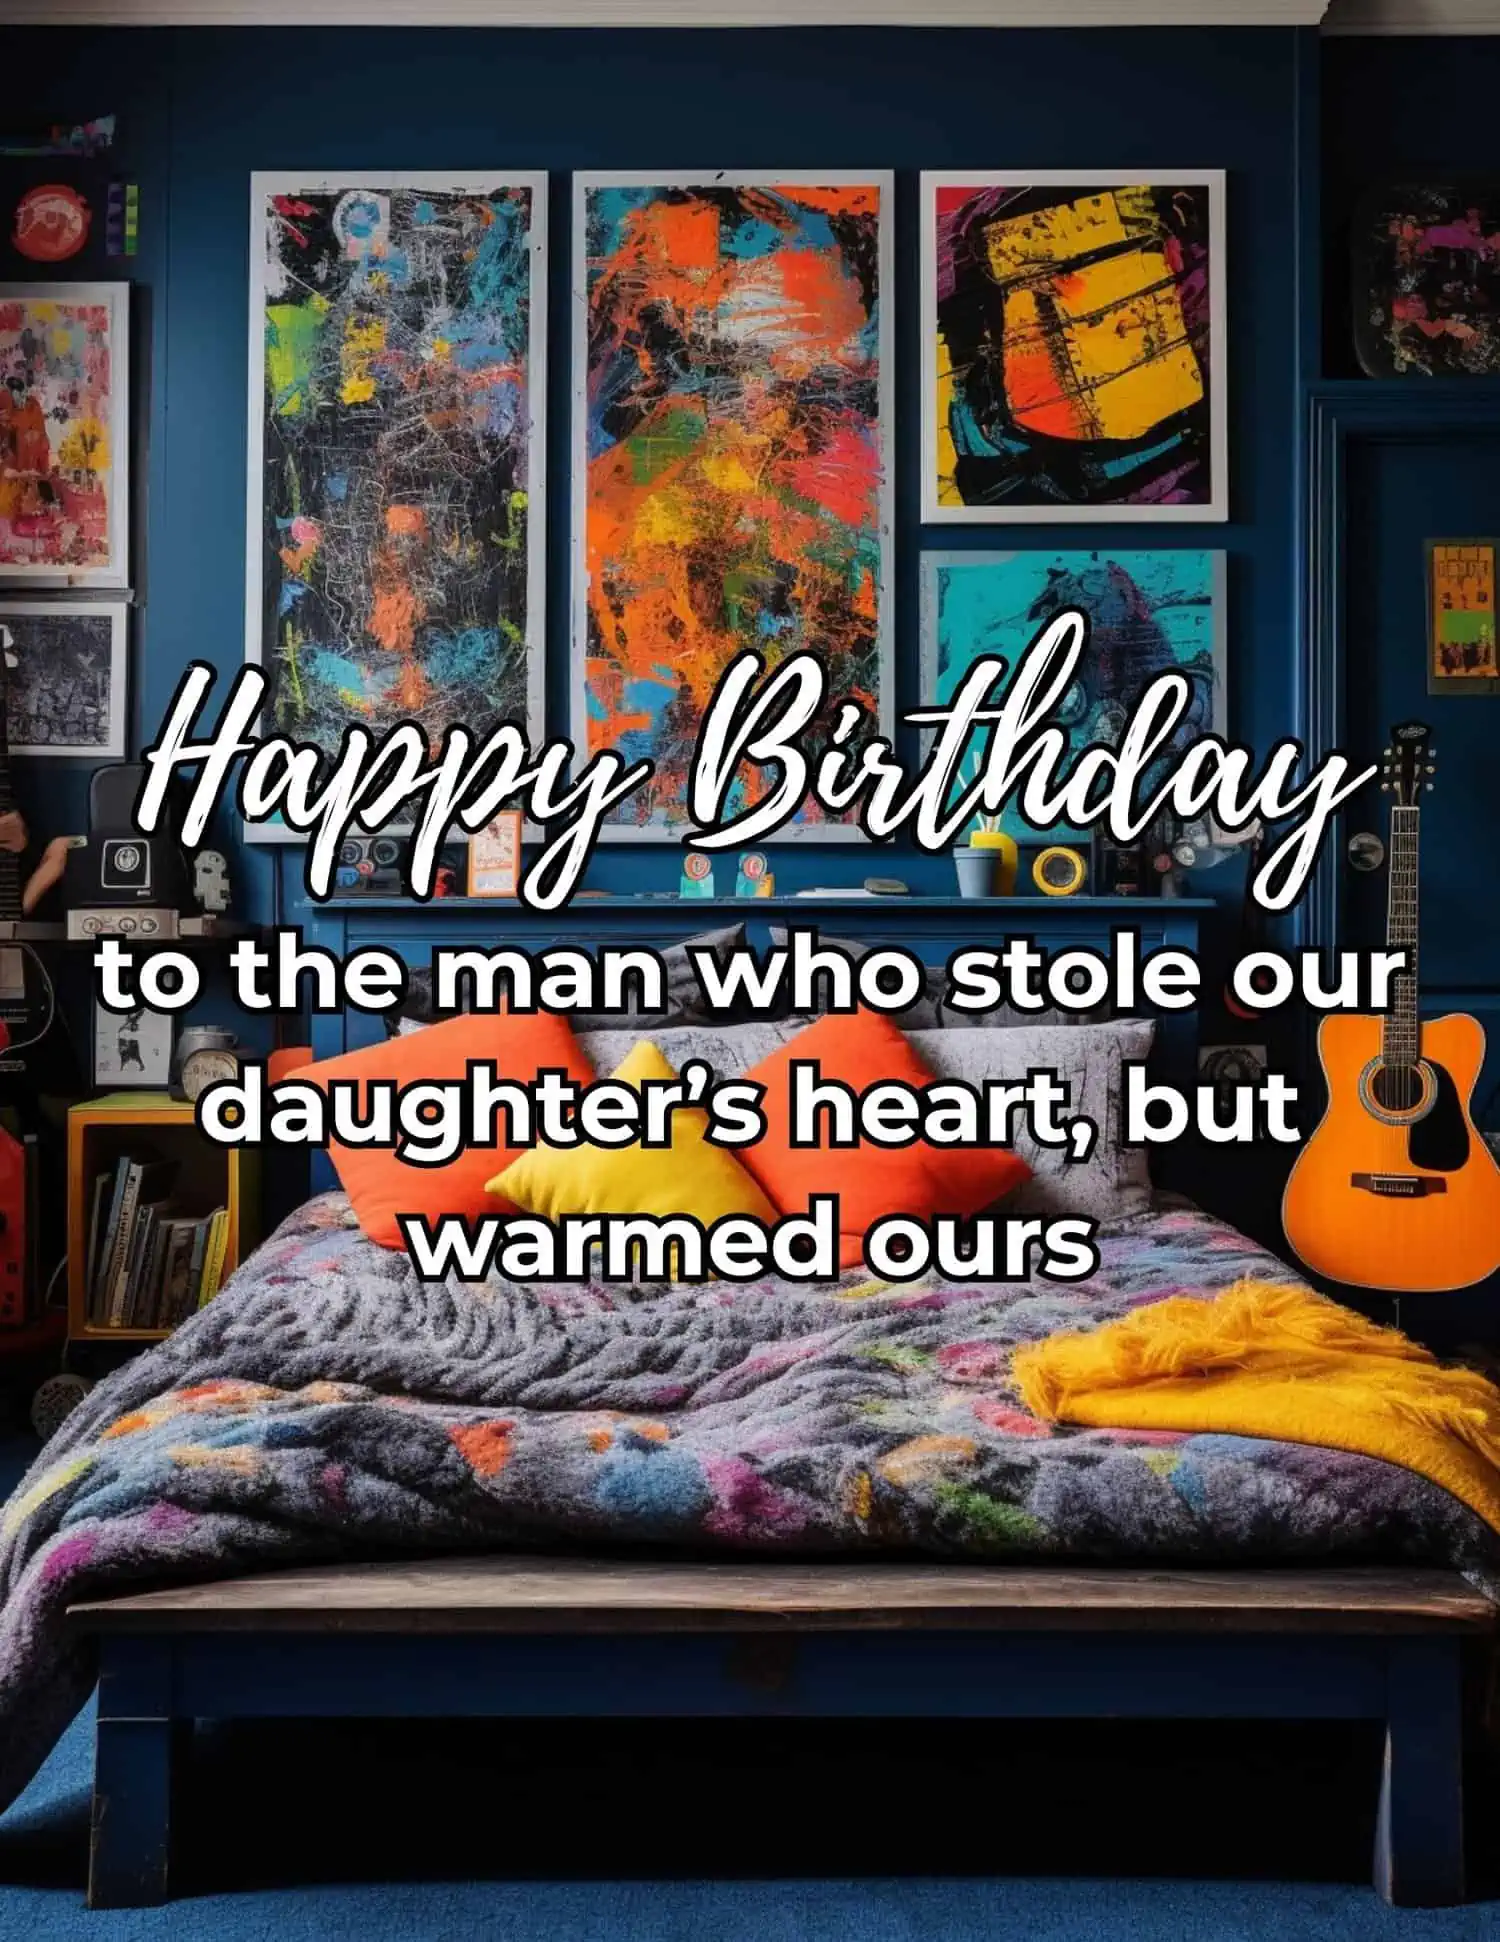 A collection of heartfelt and meaningful birthday wishes tailored for your son-in-law.